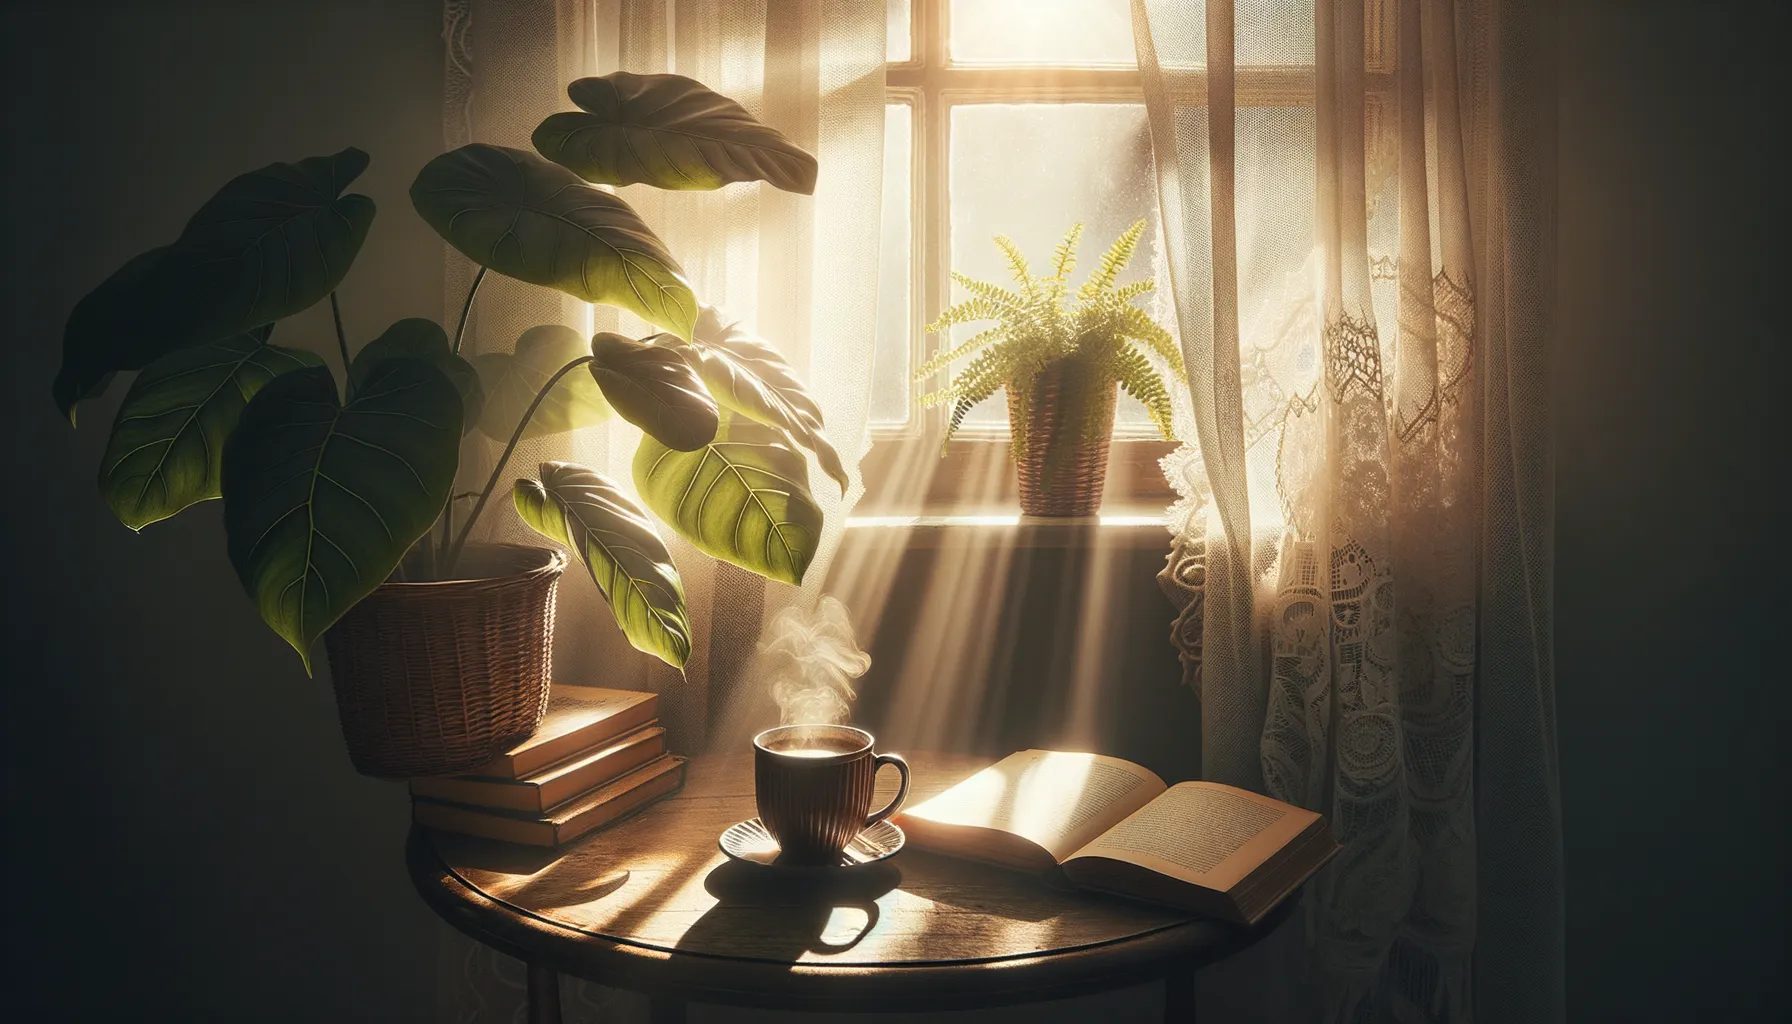 In the quiet morning glow, simple pleasures await—the day's first sip of coffee, a chapter of a favorite story, a reminder that happiness often resides in life's quiet moments.